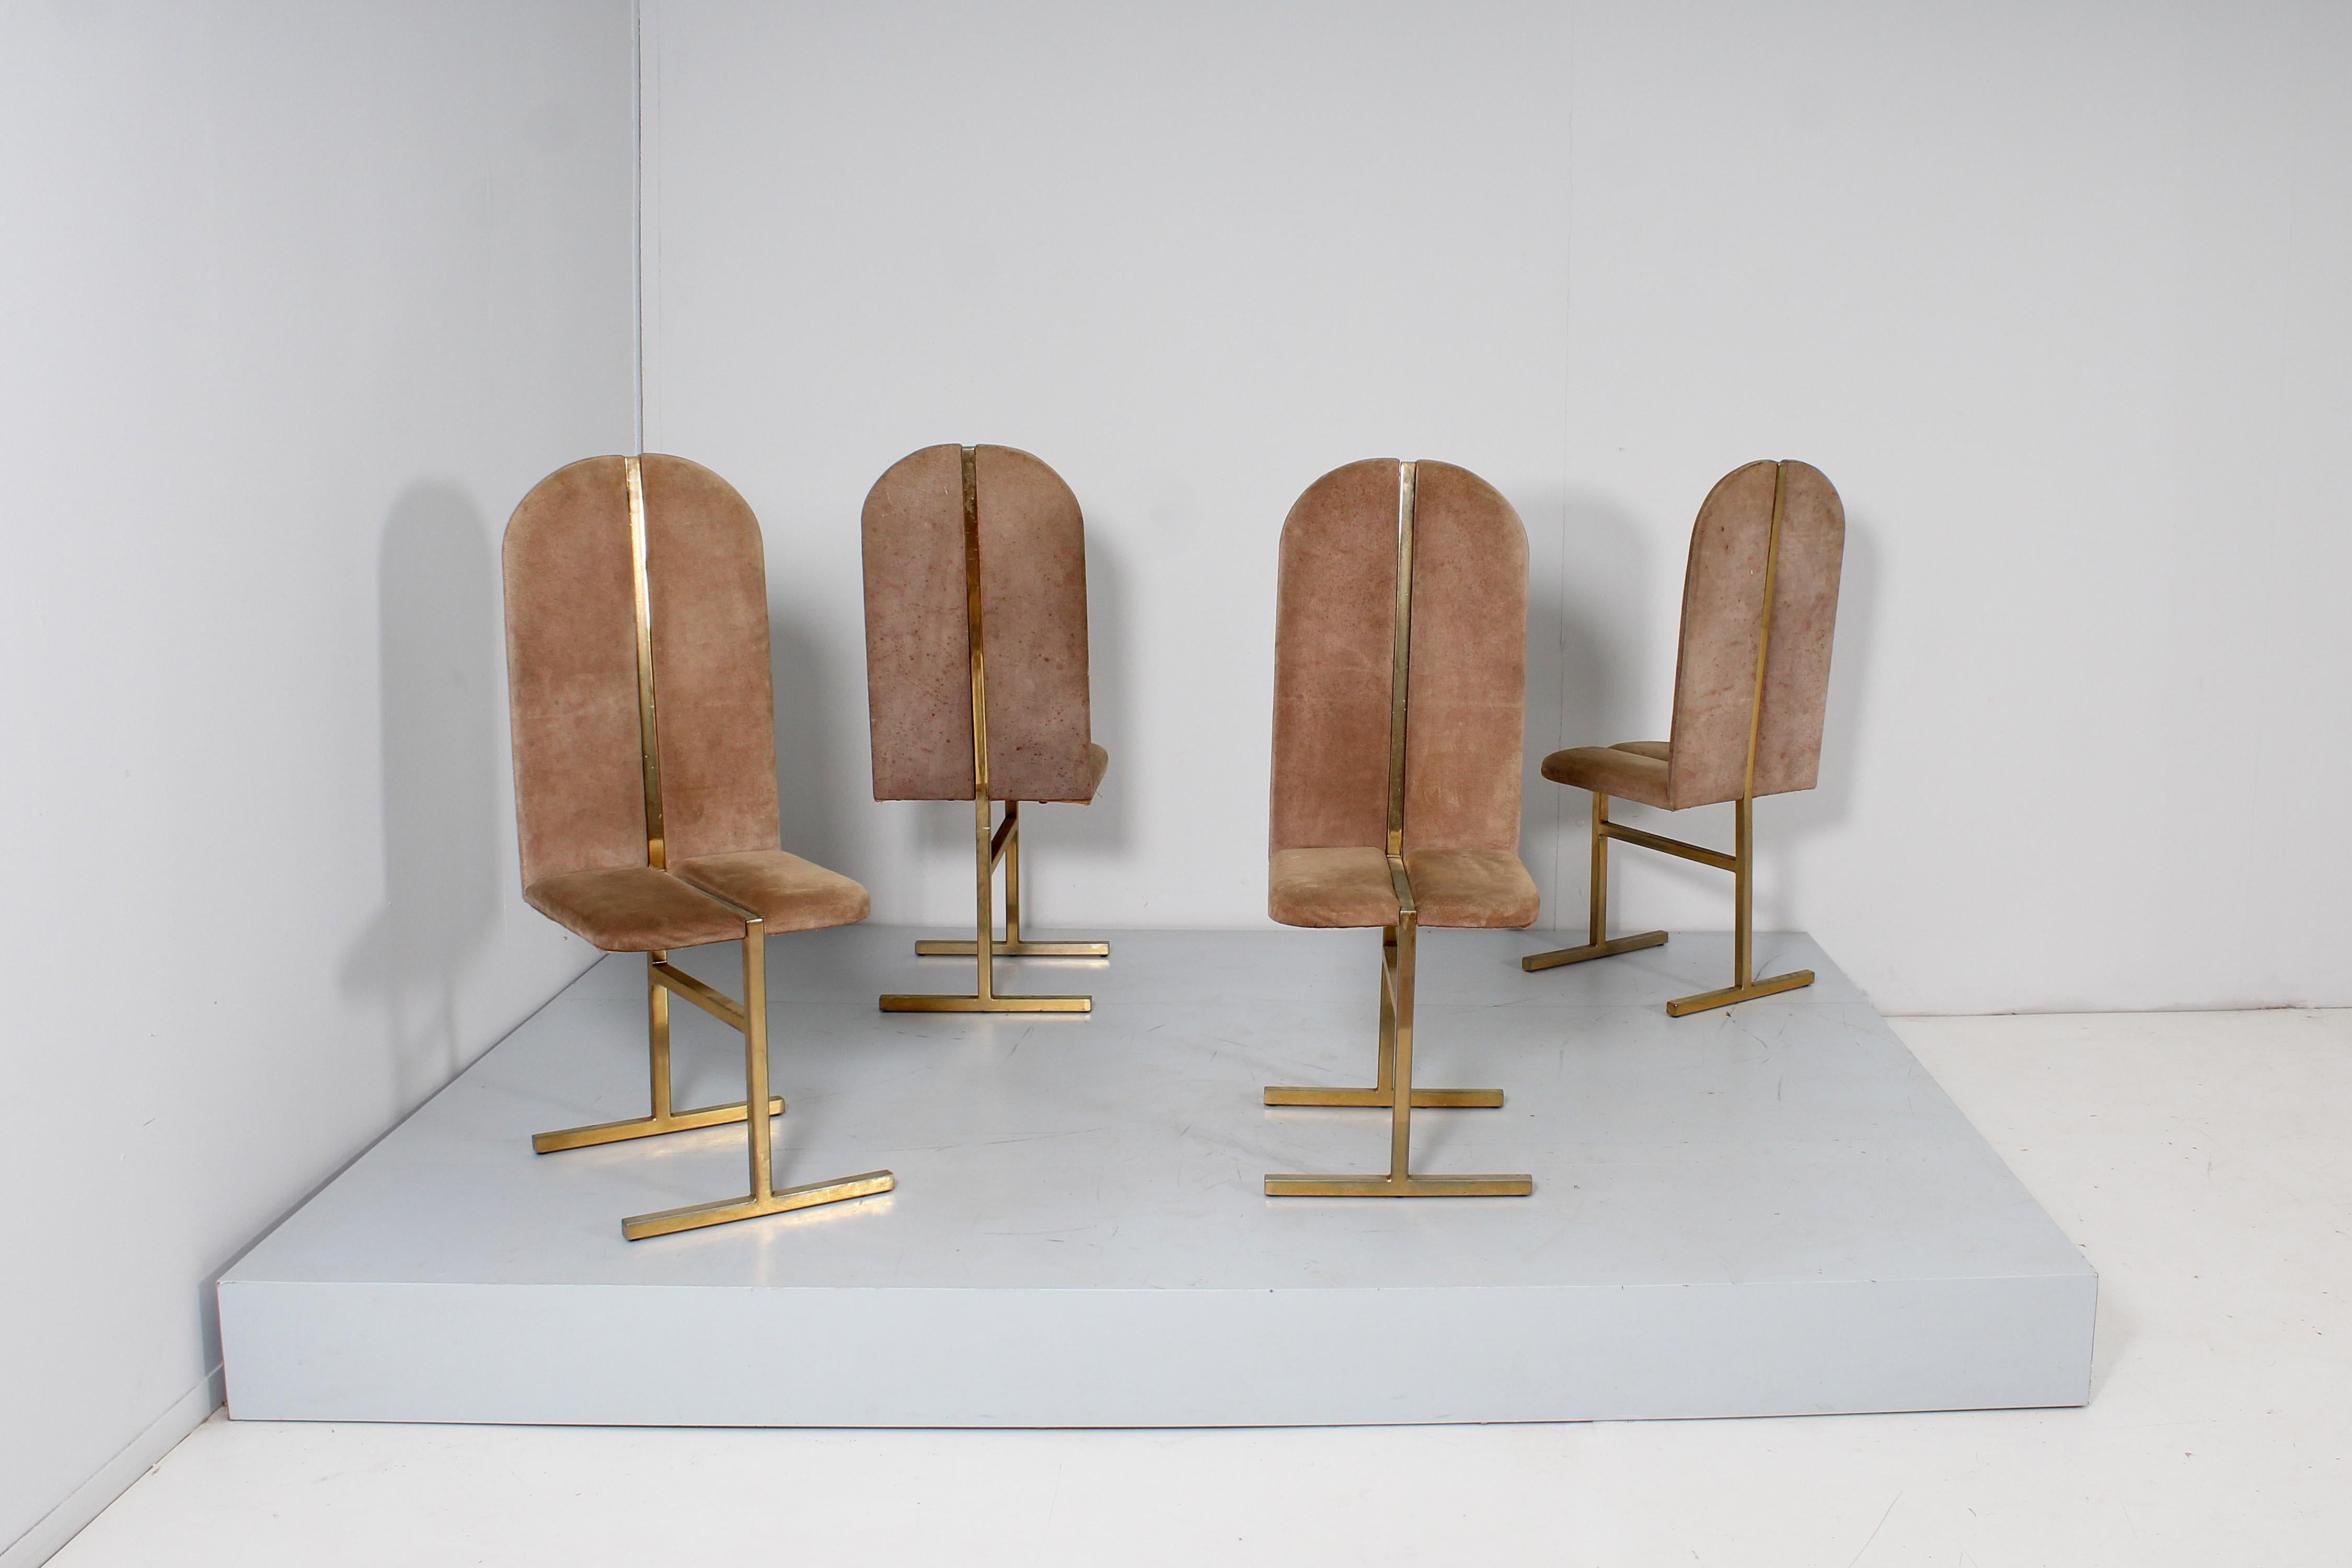 Italian Mid-Century Turri Milano Set of 4 Brass and Suede Chairs, Italy, 70s For Sale